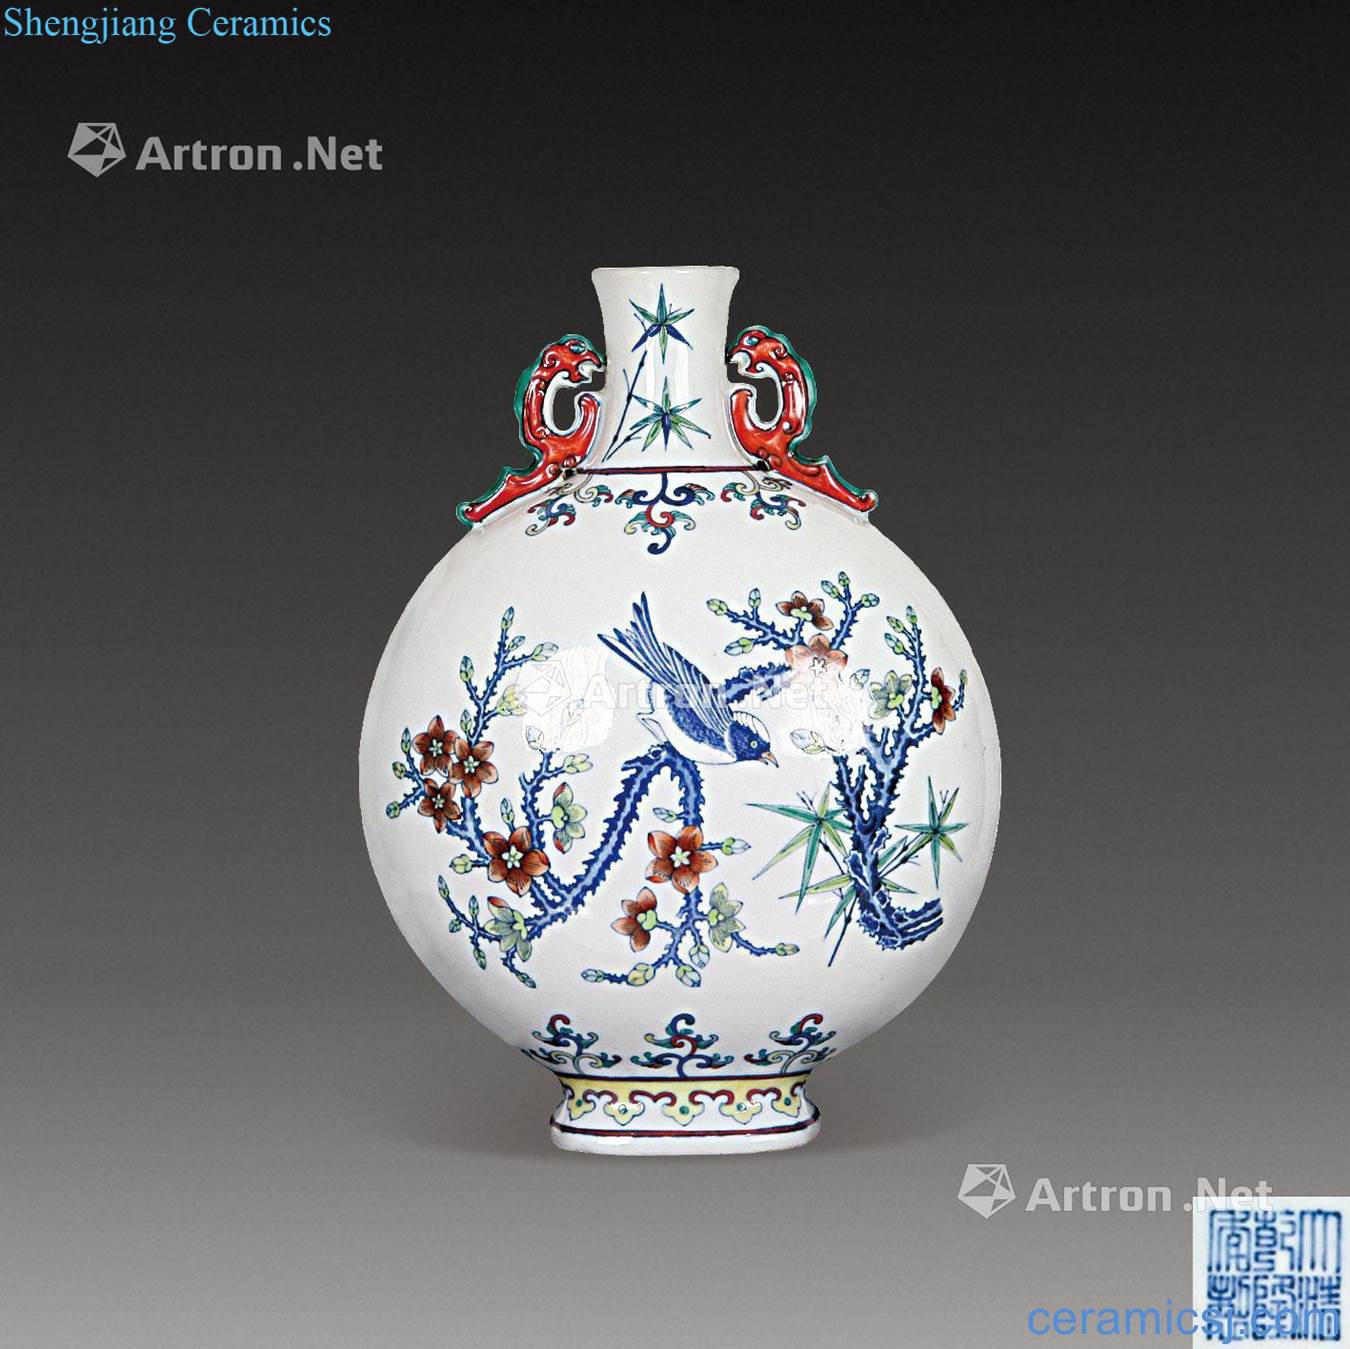 Qing bucket color of flowers and birds on bottles